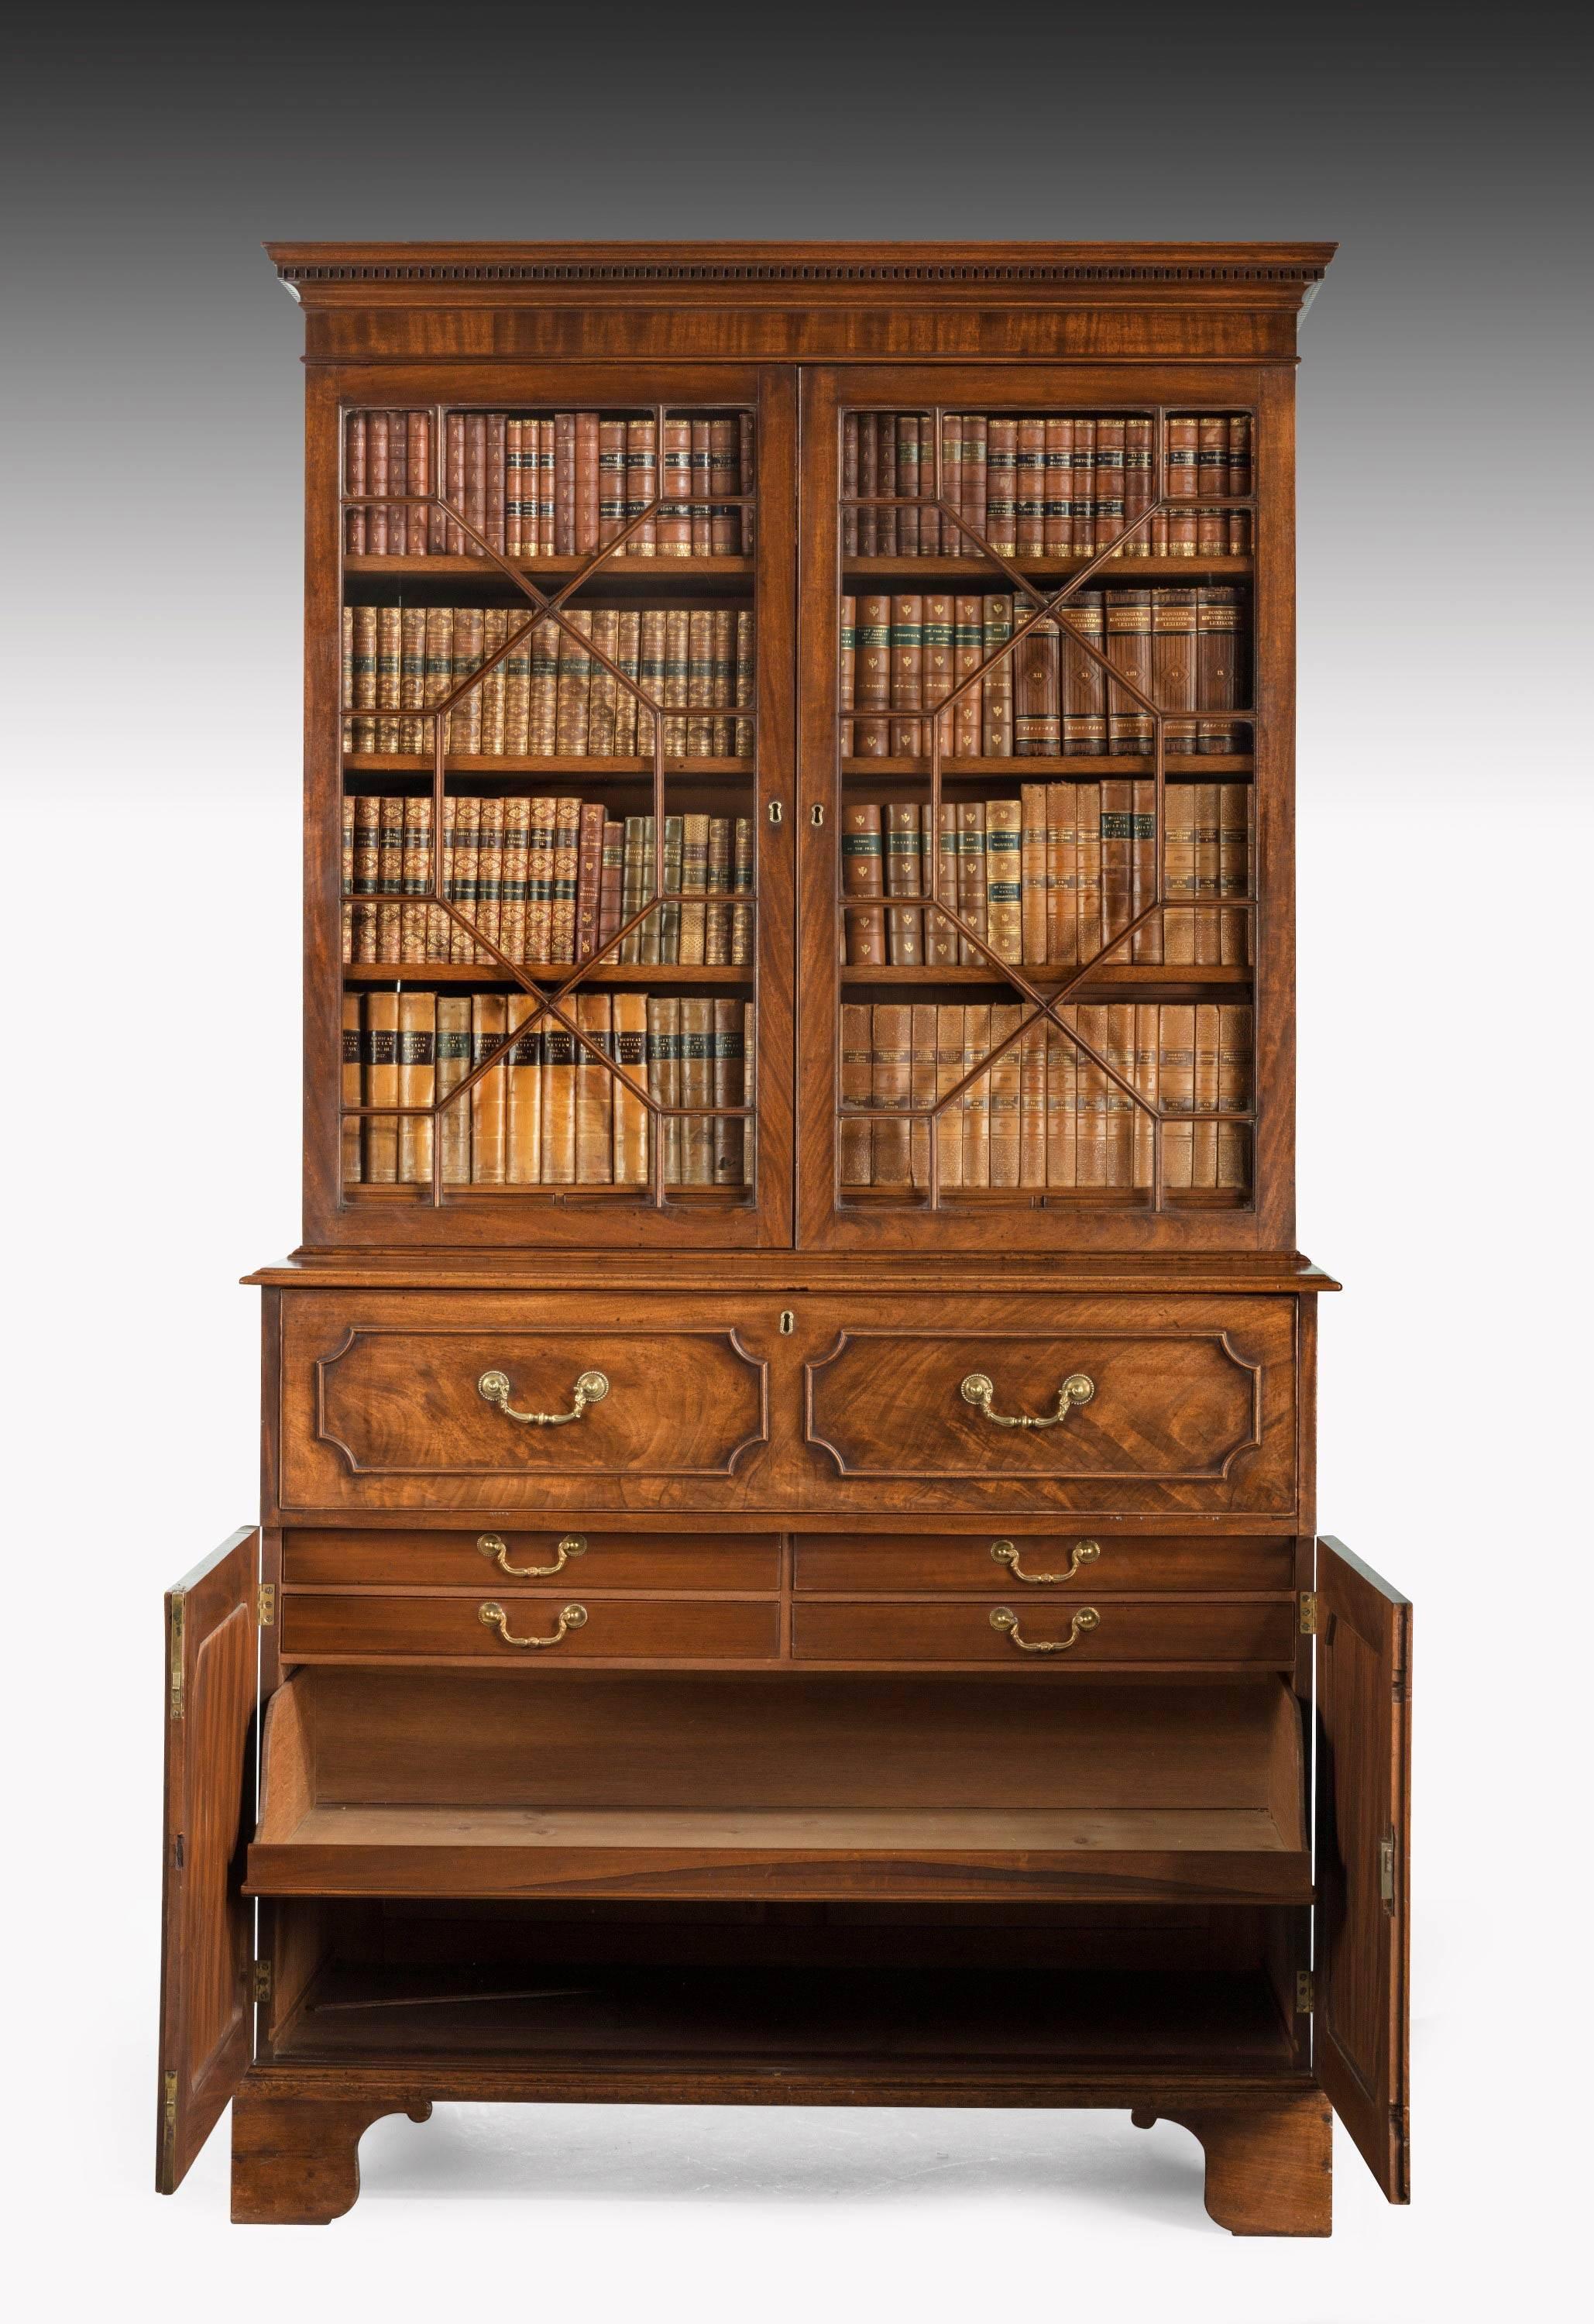 A good George III period mahogany secretaire bookcase attributed to Gillows of Lancaster. The interior finely fitted with Pidgeon holes, drawers and central cupboard. Retaining the original cast gilt bronze swan neck handles. The upper section with